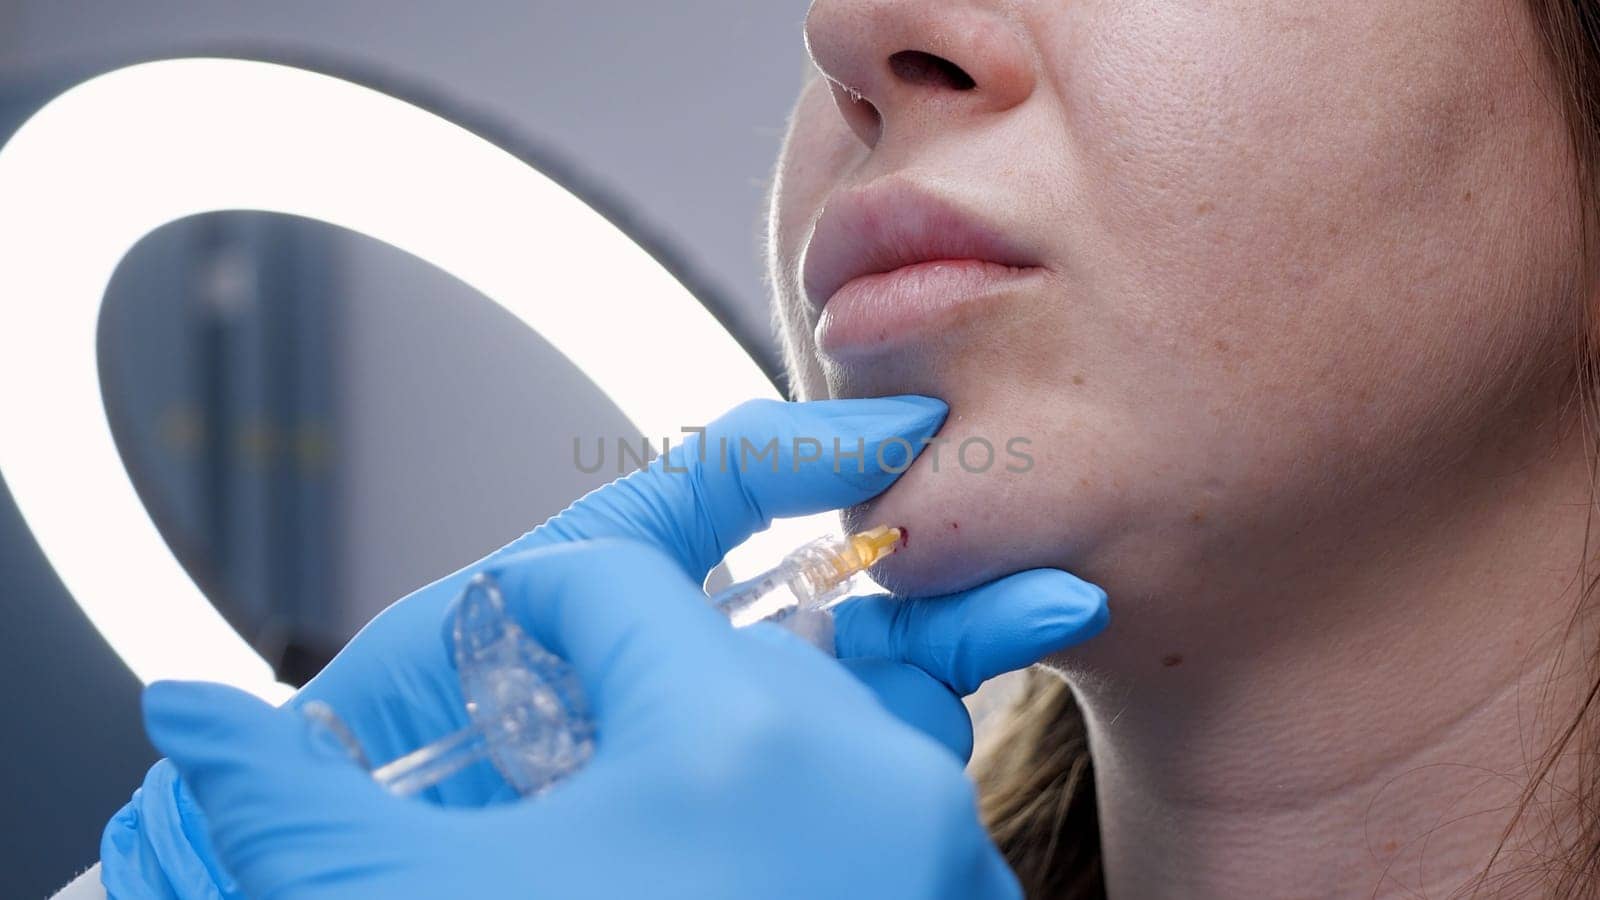 A doctor inserts painkillers into the chin area of womans face by Skywayua